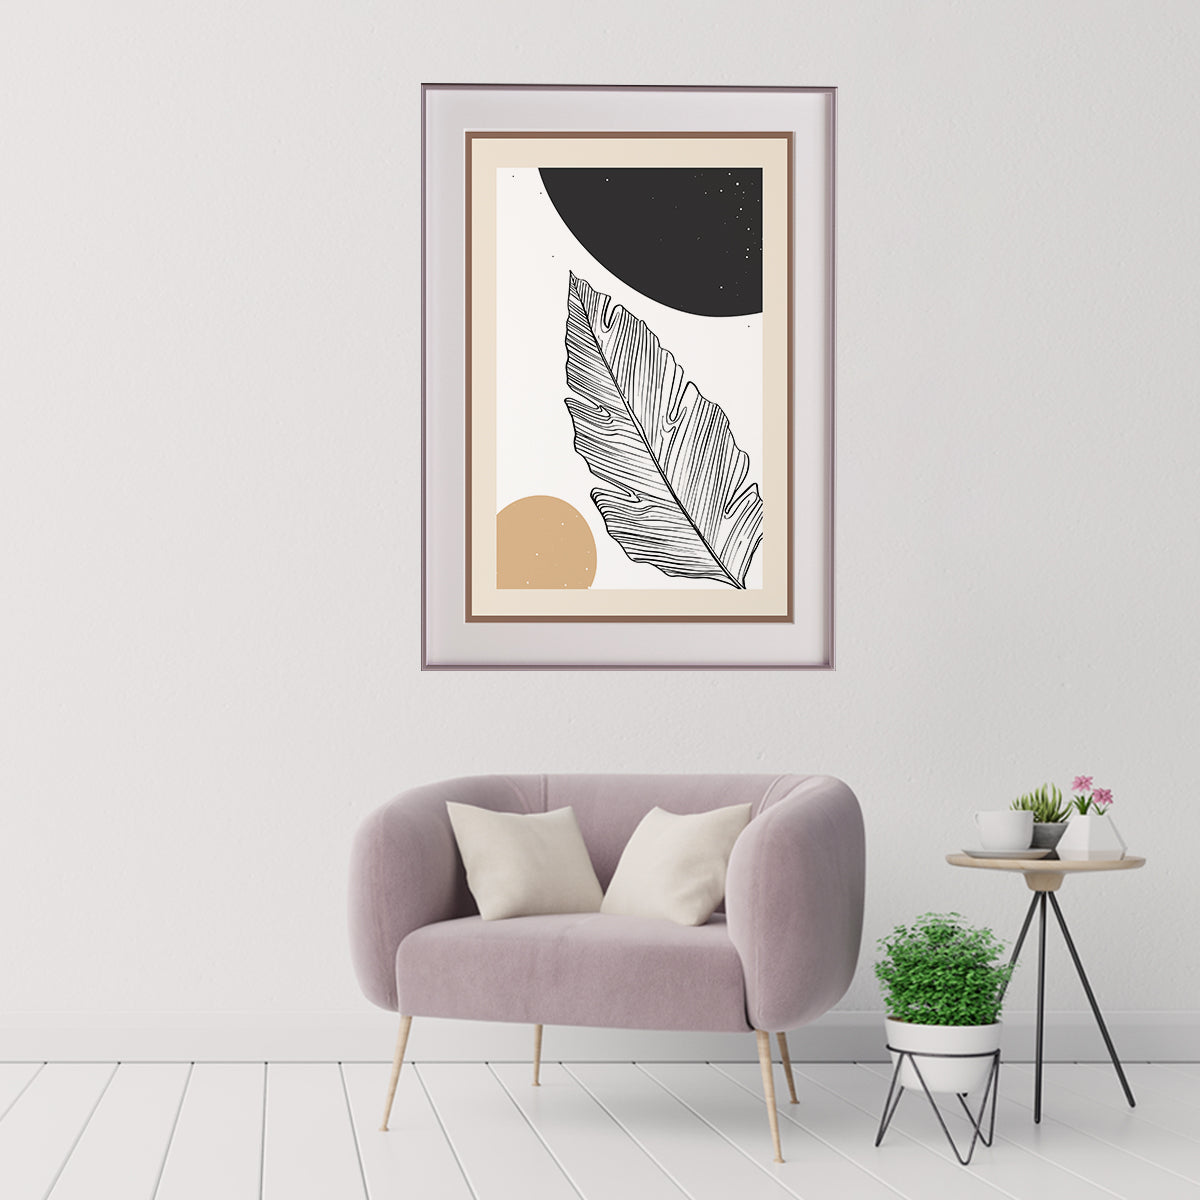 Modern Abstract Leaves Poster Art Decor-Vertical Posters NOT FRAMED-CetArt-8″x10″ inches-CetArt